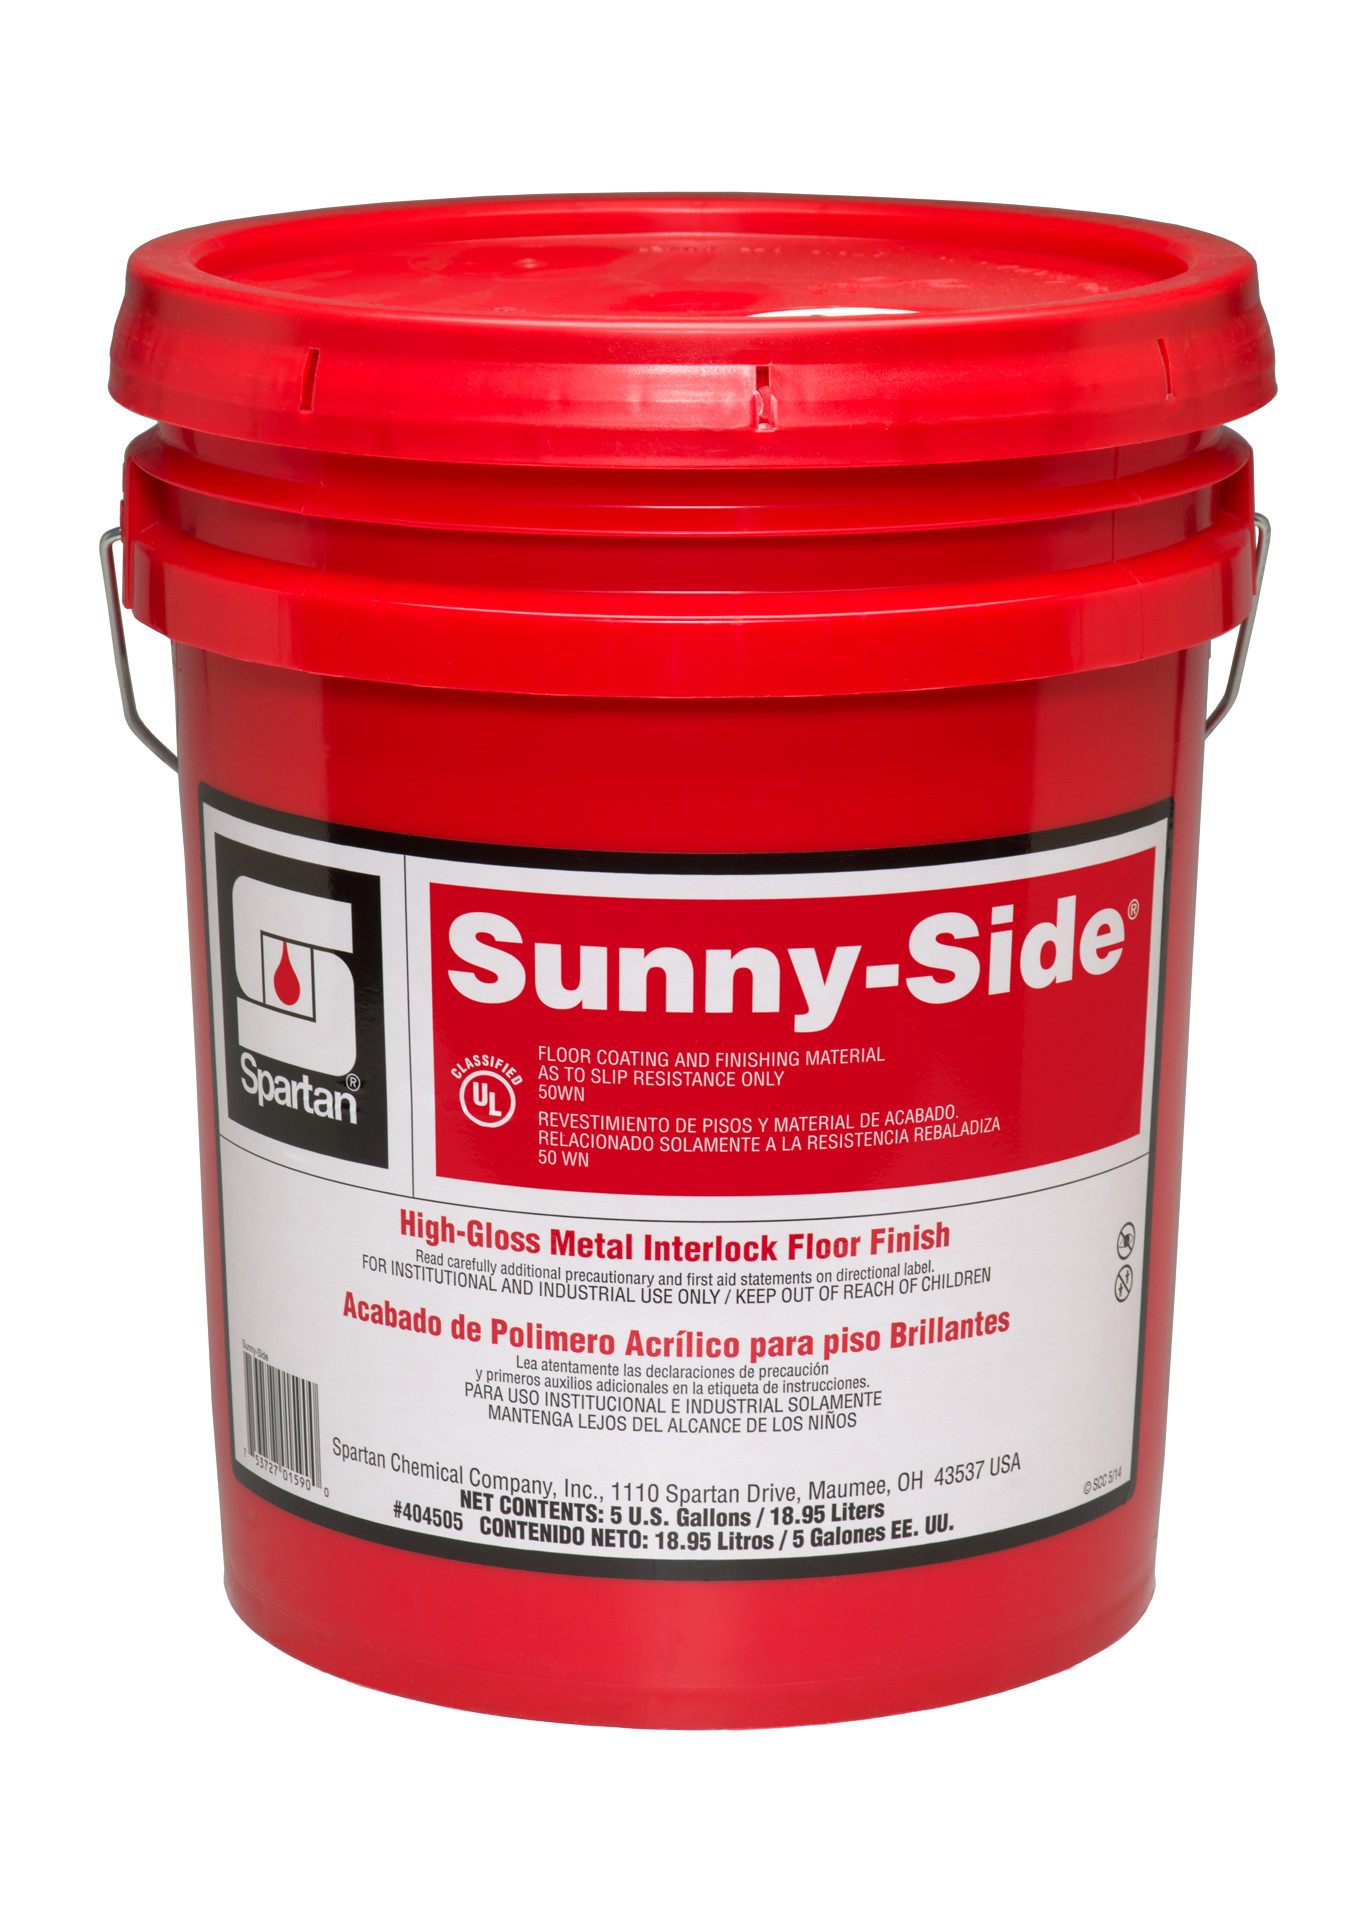 Spartan Chemical Company Sunny-Side, 5 GAL PAIL